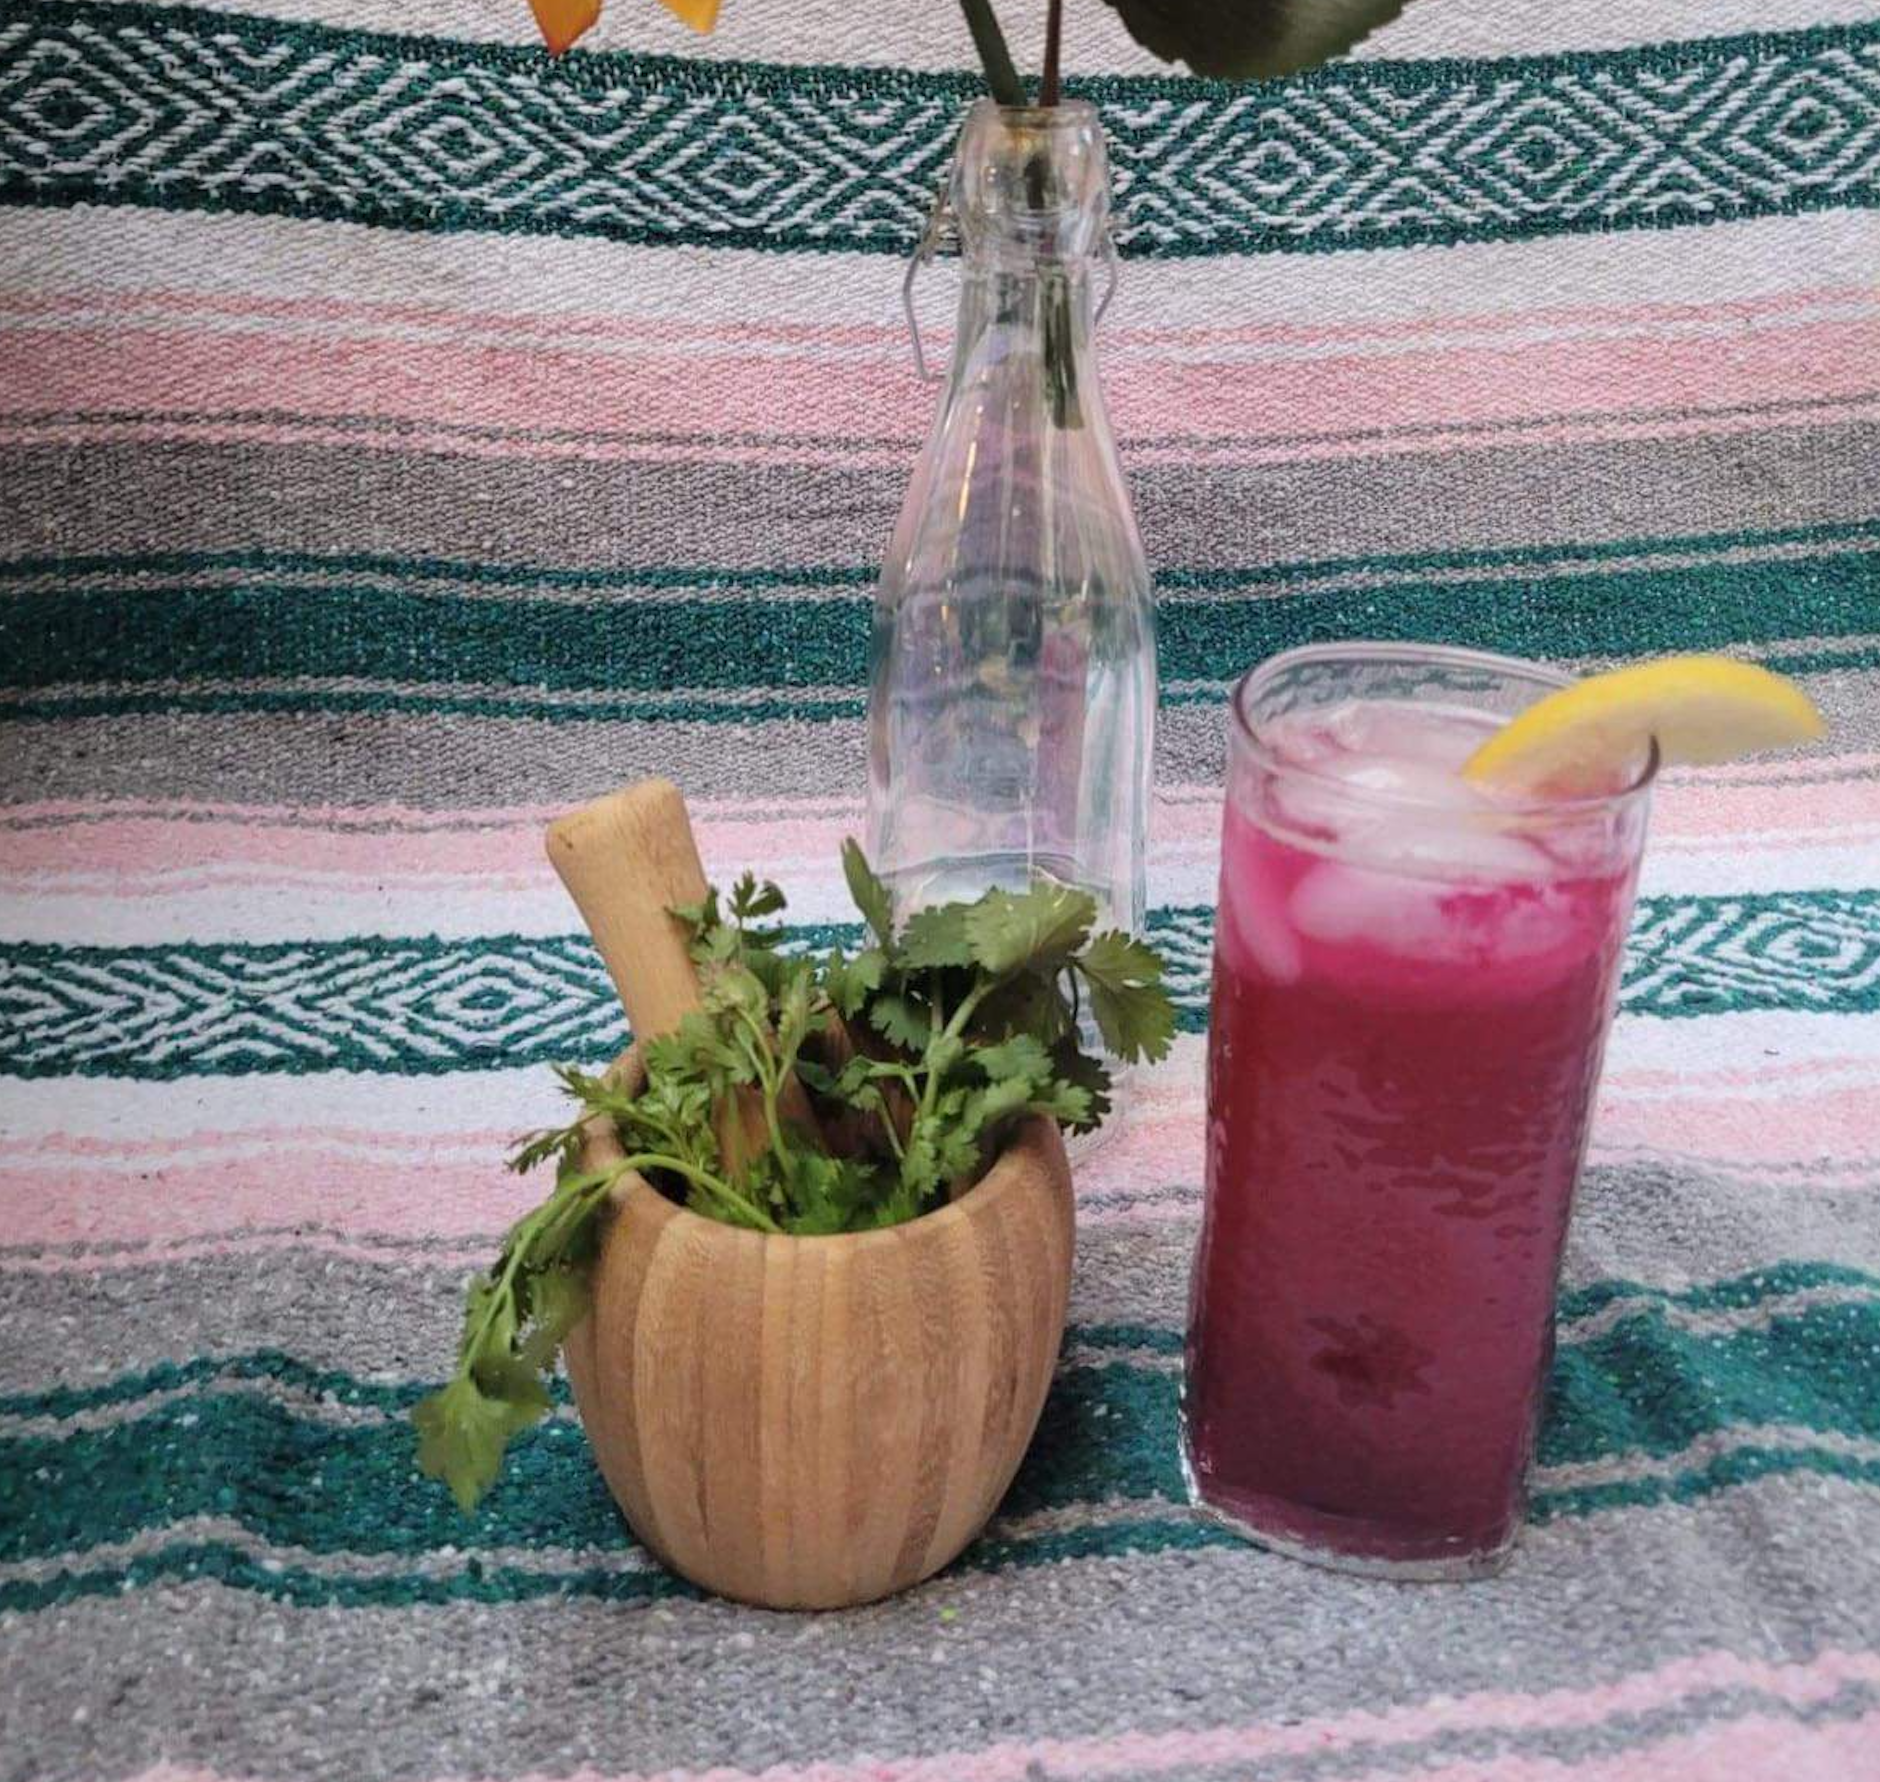 a vibrant magenta beverage in a glass set on a backdrop of patterned blankets